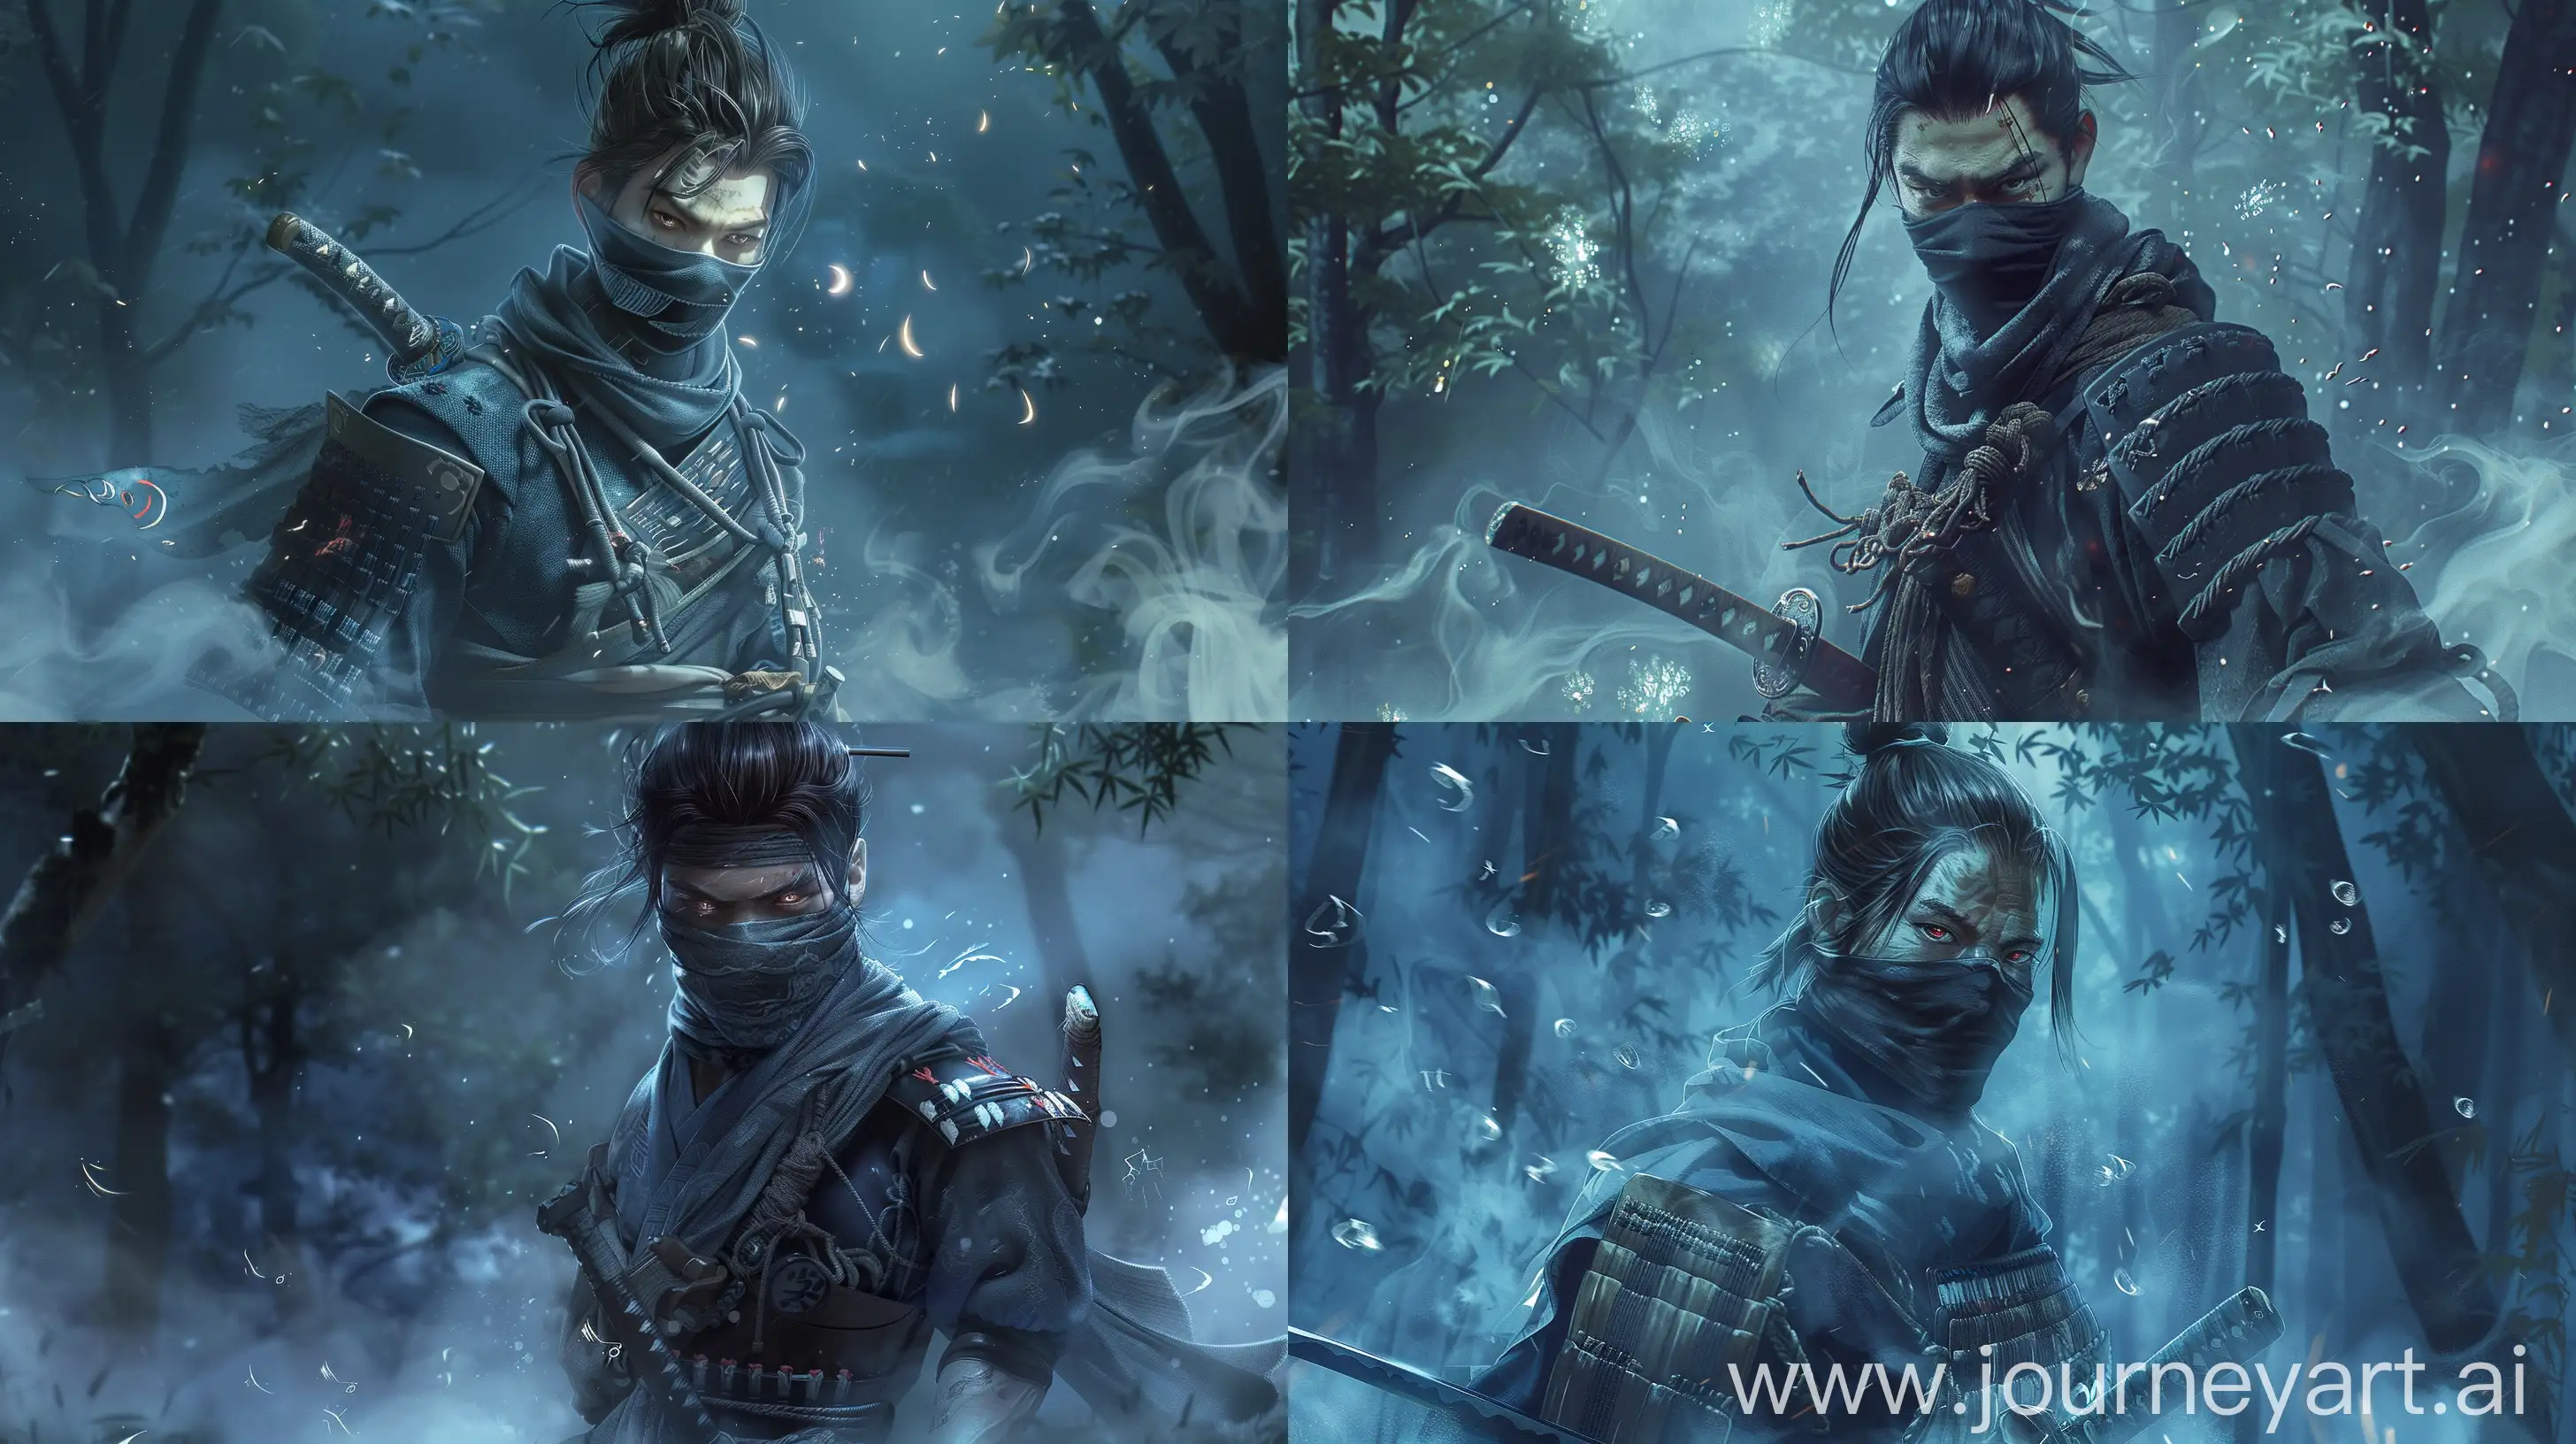 2D graphics anime A stealthy and enigmatic ninja warrior, Hattori Hanzo, from the Sengoku era of Japan, standing in a misty, moonlit forest. He is dressed in traditional dark ninja attire with a fitted shozoku, a cloth mask covering the lower half of his face, and a chonmage hairstyle. His intense eyes are visible, sharp and calculating. He holds a katana with a beautifully detailed hilt, the blade partially unsheathed, reflecting the moonlight. Shuriken and kunai are strapped across his chest, ready to be thrown. The atmosphere is mystical, with faint glowing runes dissipating in the smoke around him. The forest is dense with shadows that seem to move and whisper, suggesting his connection to the shadows and his supernatural speed. The color palette is dominated by dark blues and blacks, with accents of silver and subtle hints of red from his clan's kamon on his outfit. The style is a blend of realistic and anime, capturing the essence of a legendary ninja with a touch of the fantastical elements of the Fate series. --v 6 --ar 16:9 --q 2